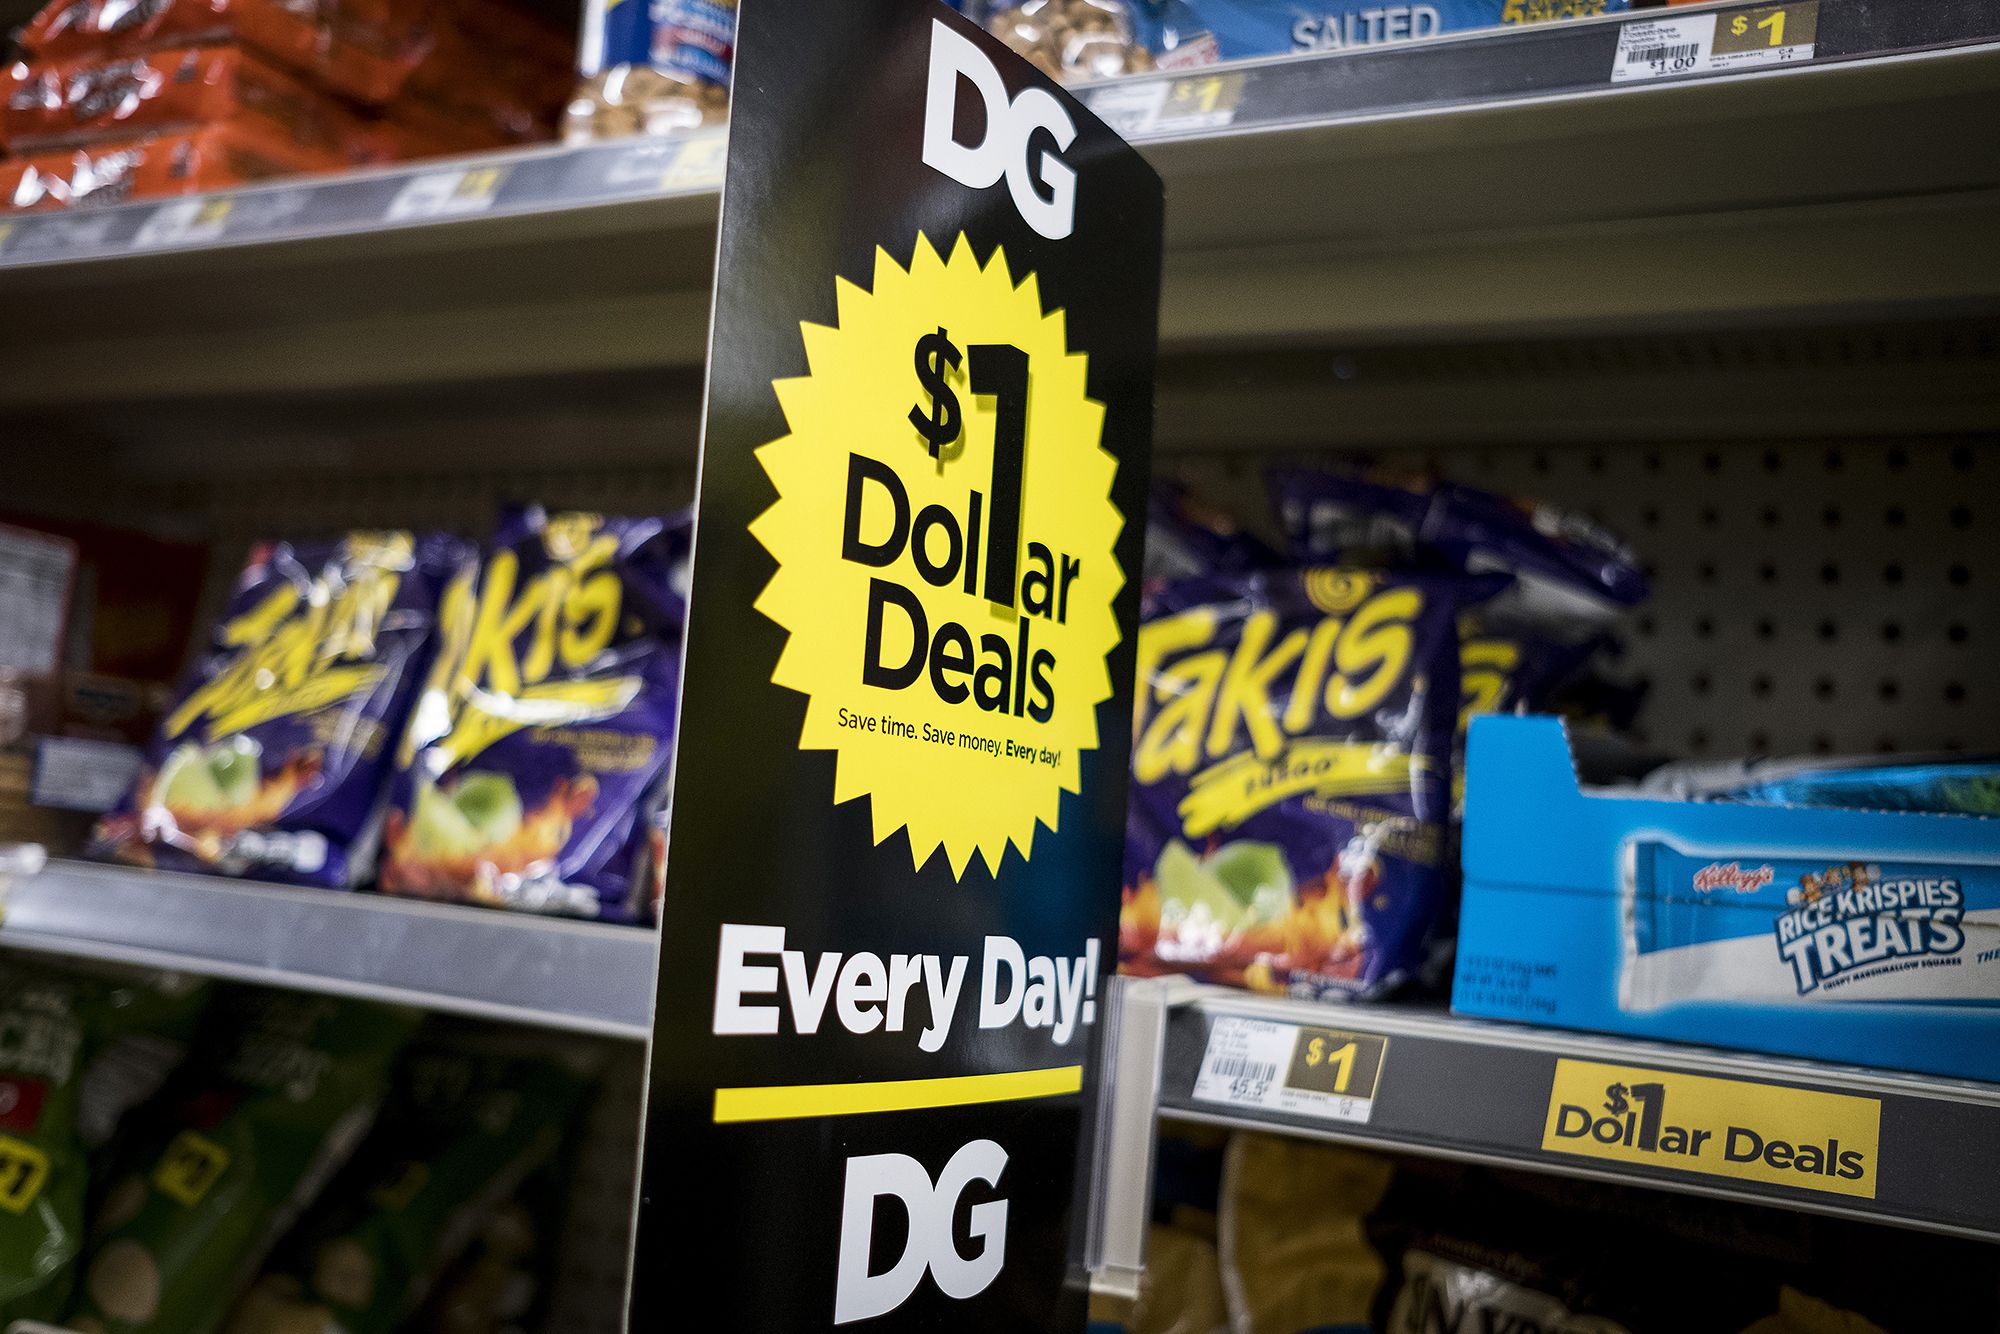 Dollar stores are battling over $1 prices